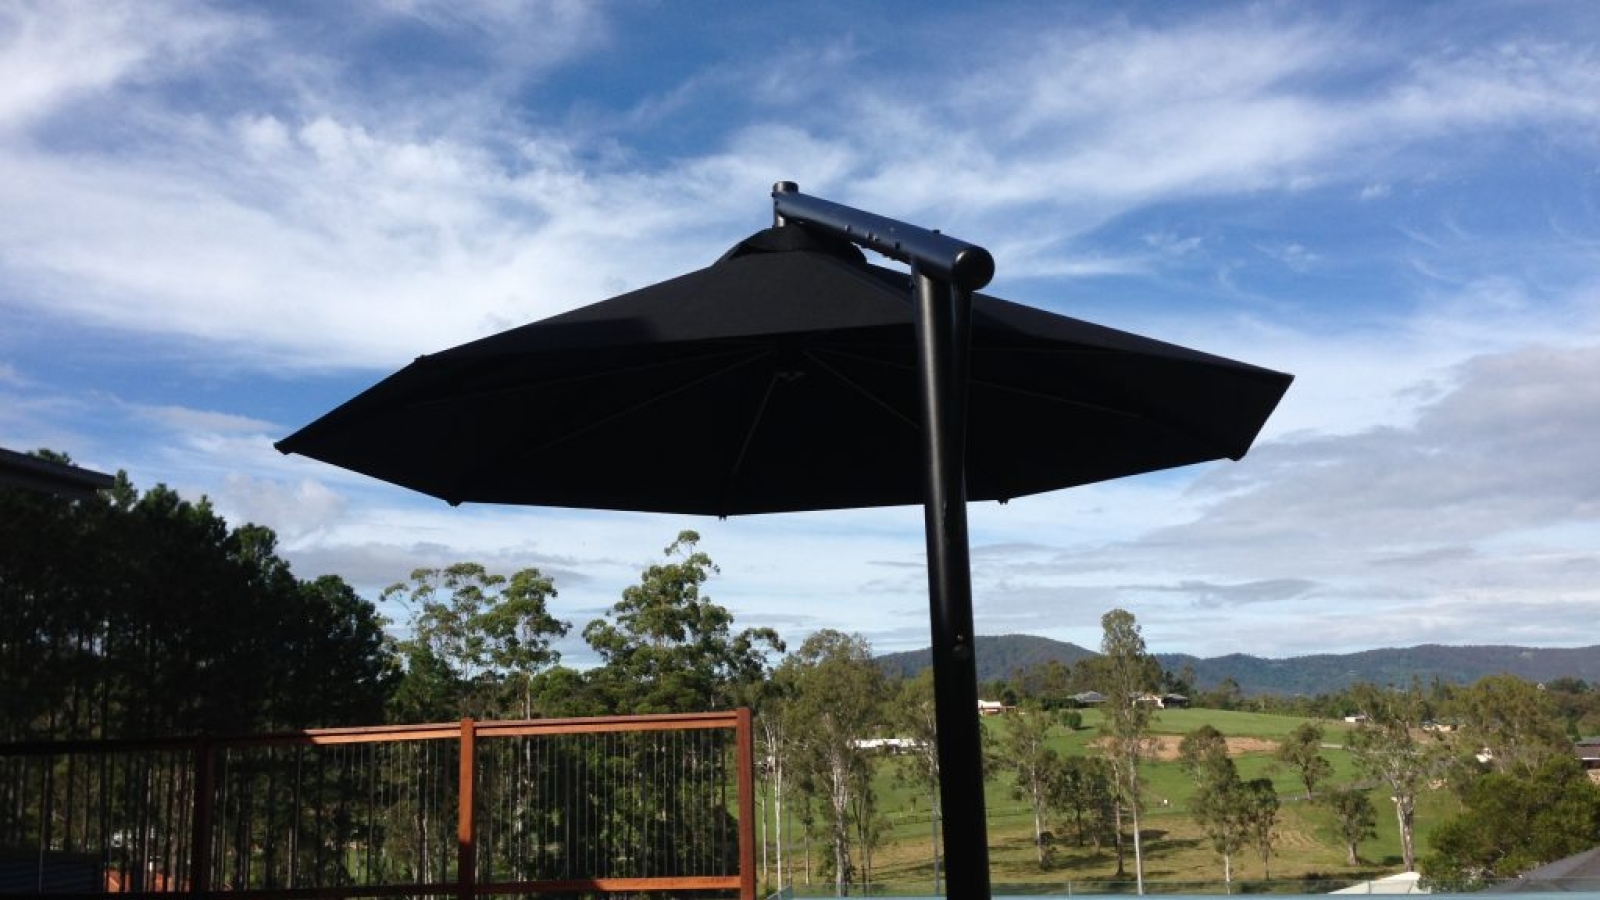 Best Uses For Side Post Giant Umbrellas